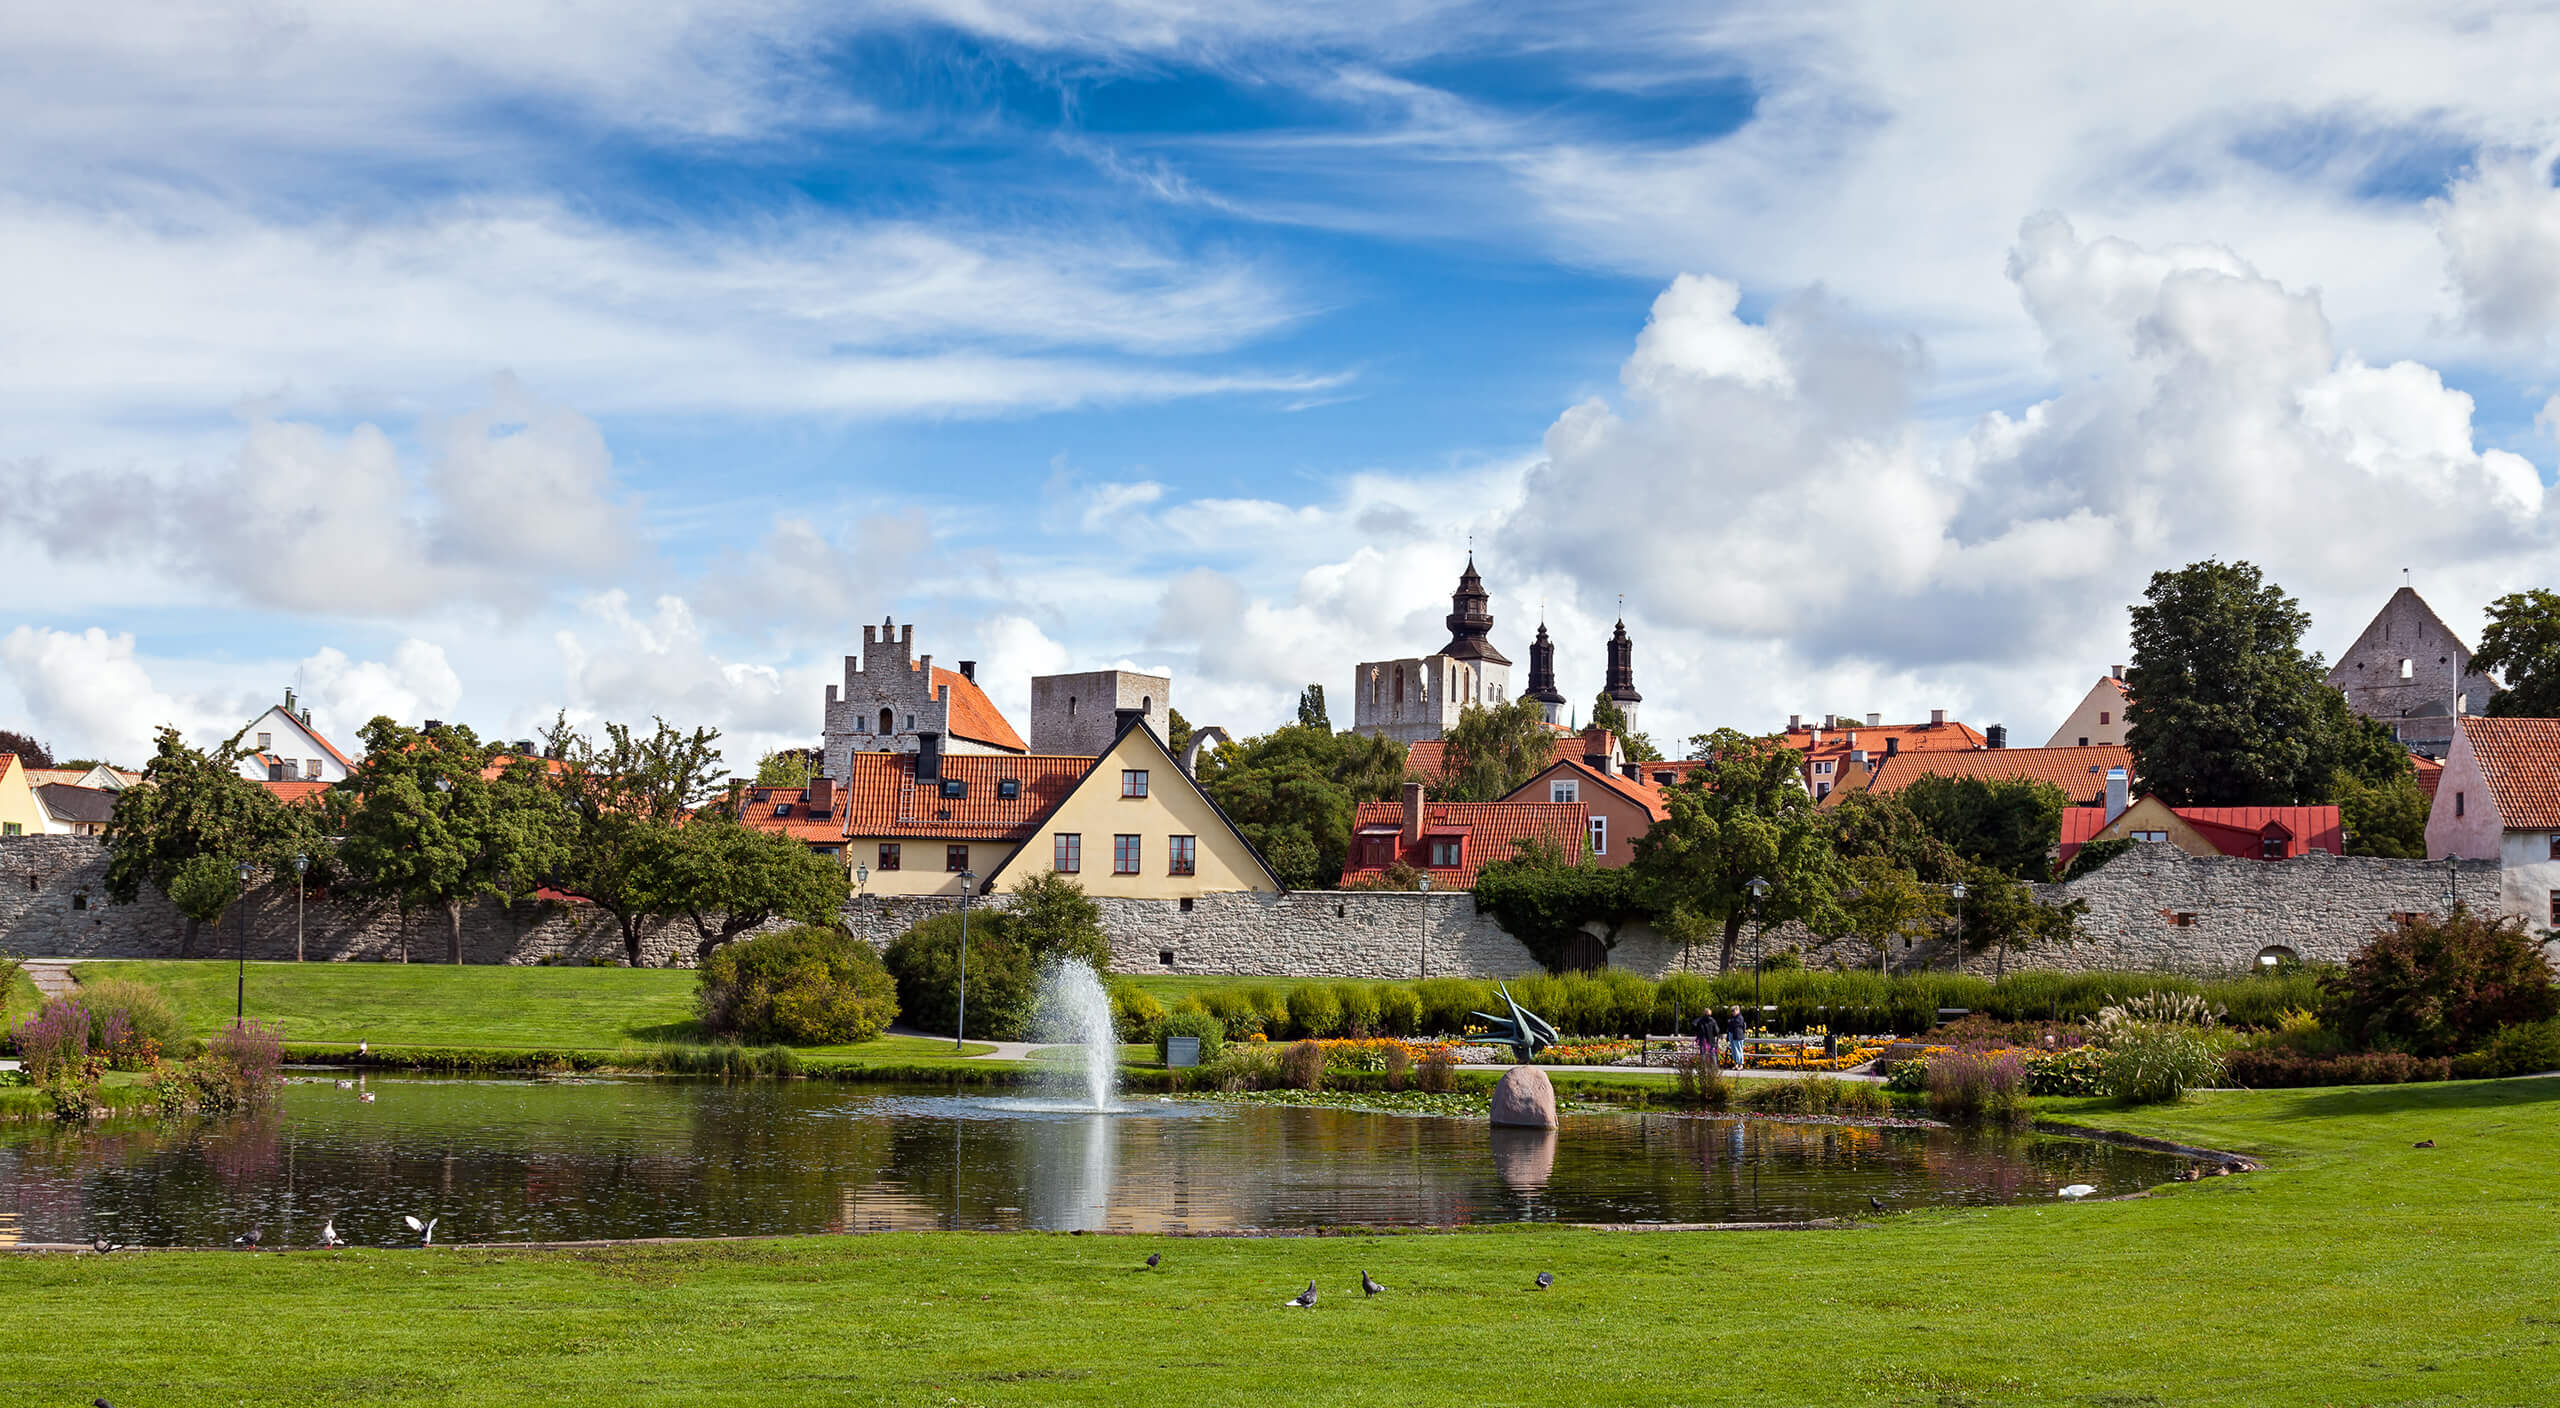 VISBY TOWN (1)